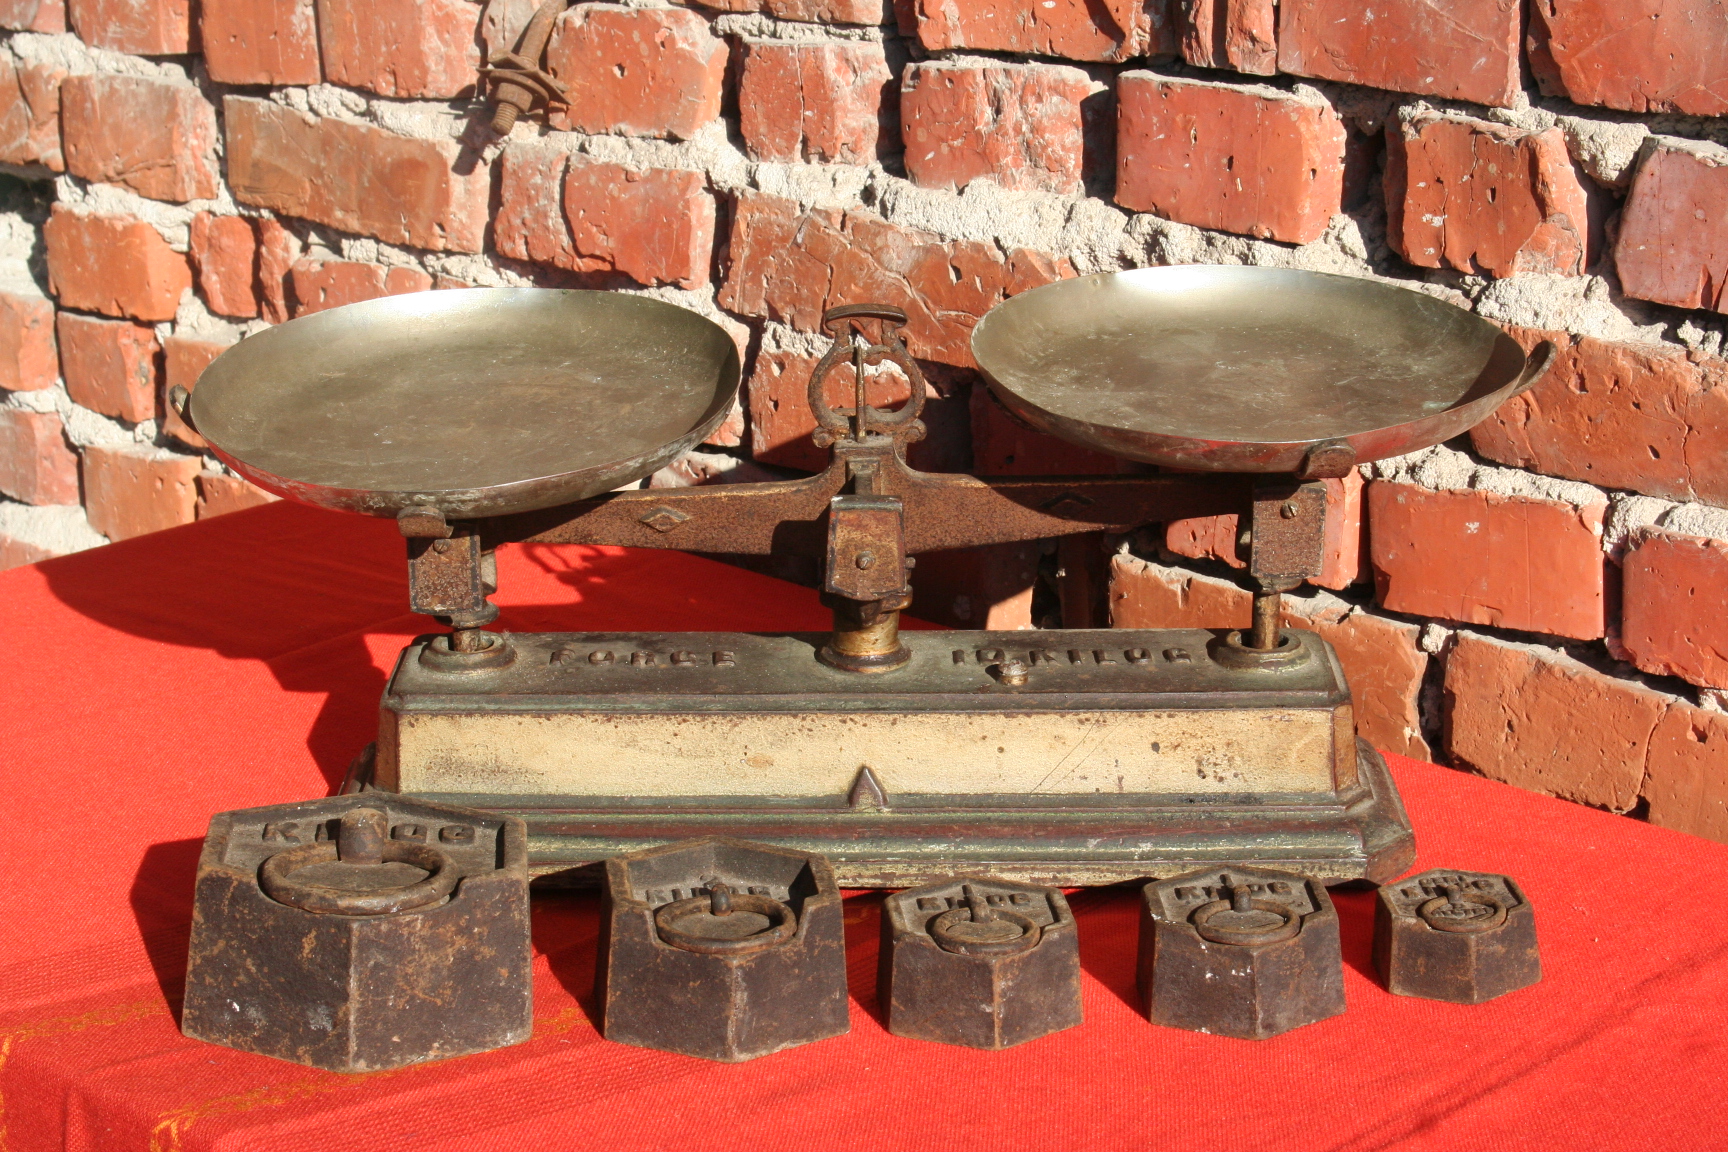  French antique scale with weights